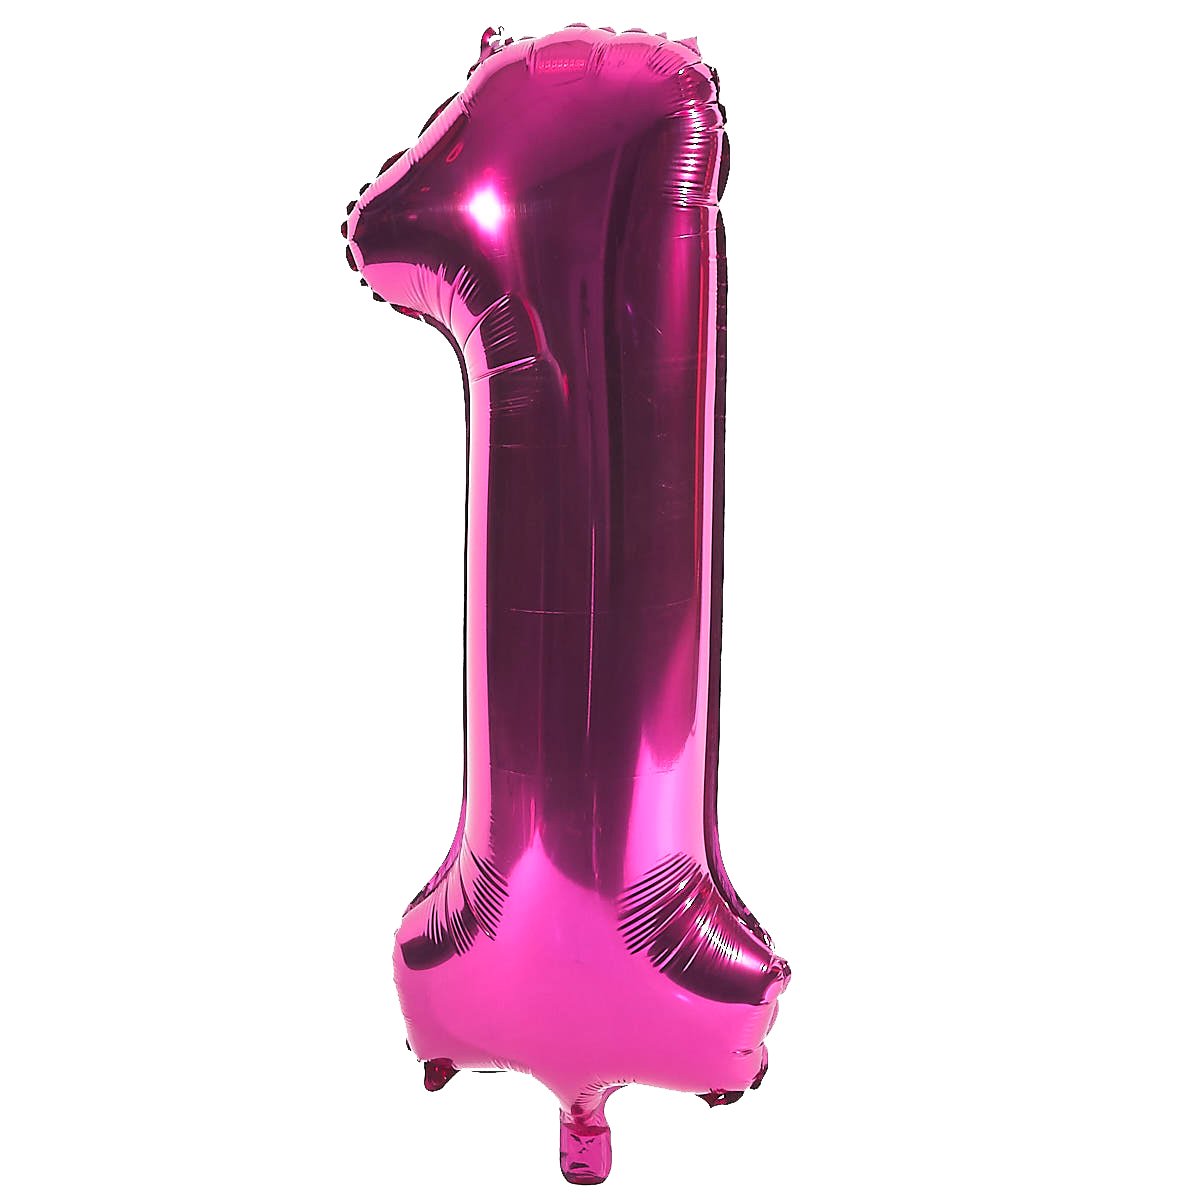 Age 18 Giant Foil Helium Numeral Balloons - Pink (deflated)